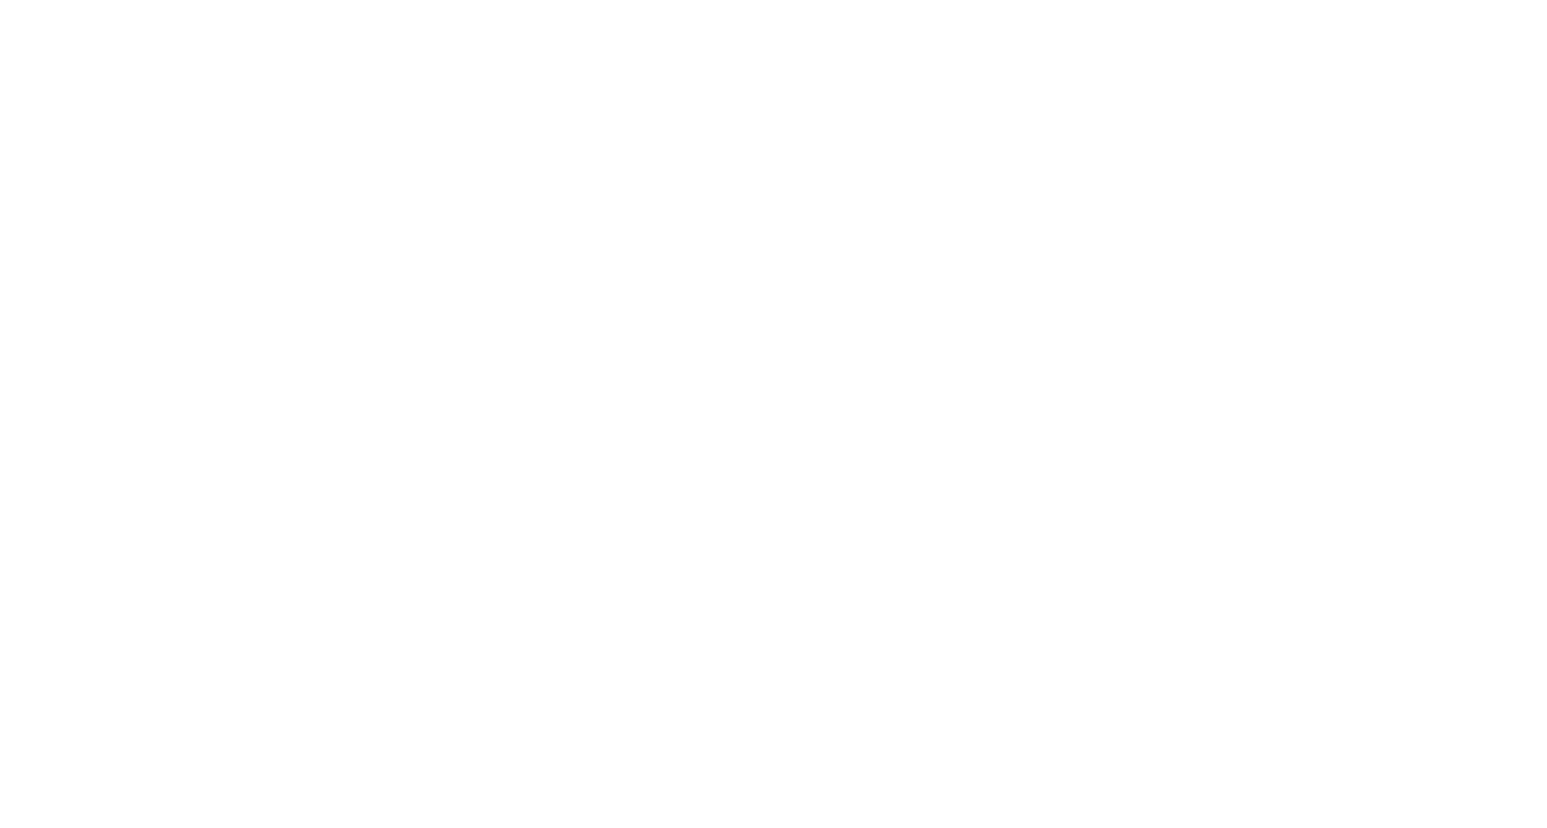 Limnios Property Group - Perth - Real Estate Agency